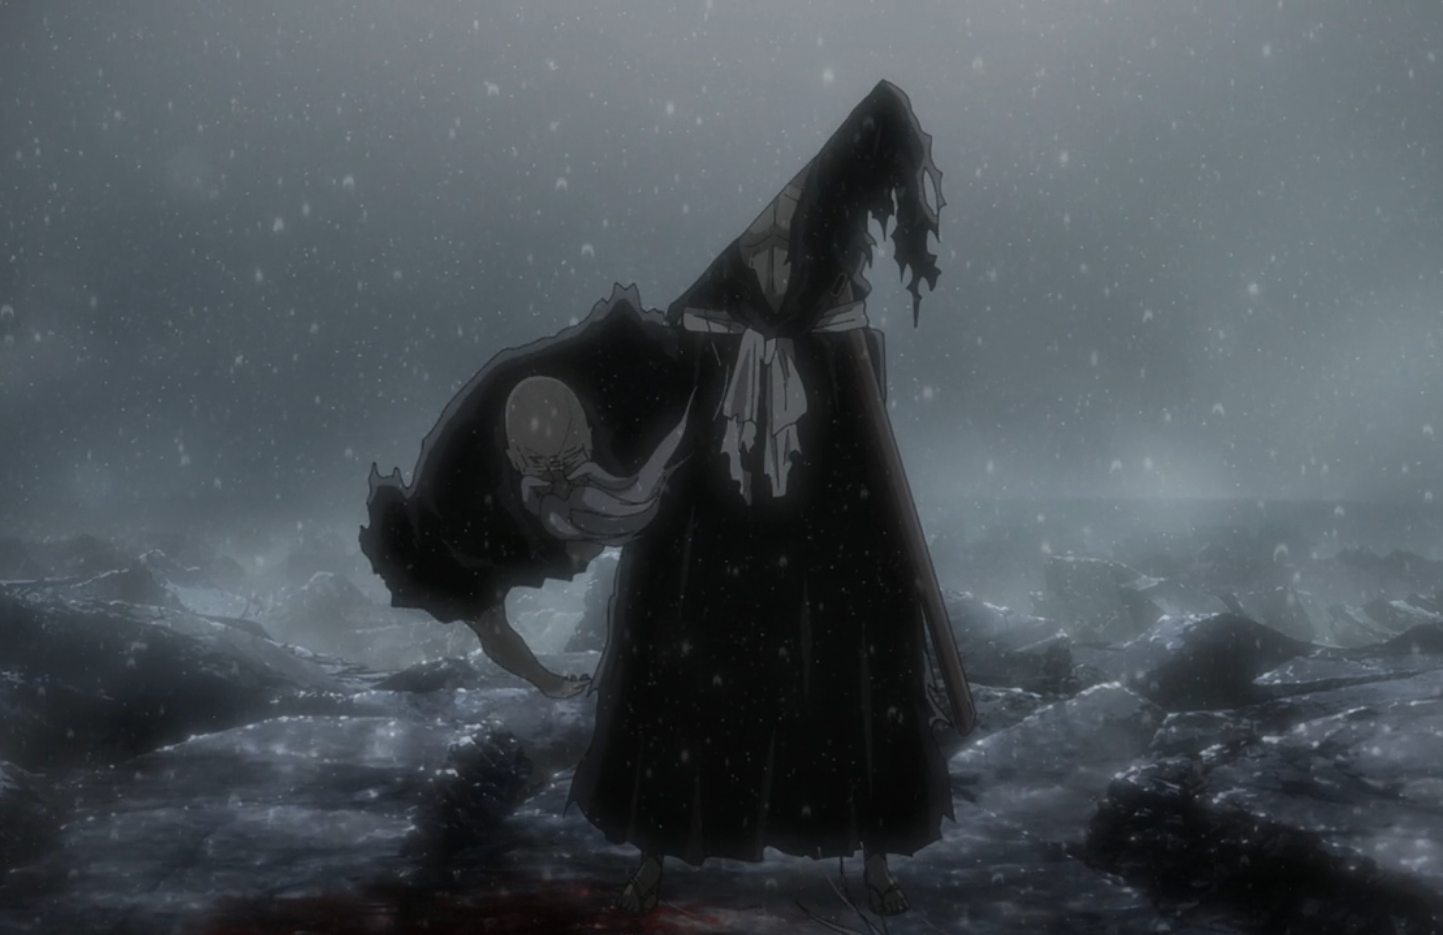 BLEACH: TYBWA Gets Special Ending for Episode 7